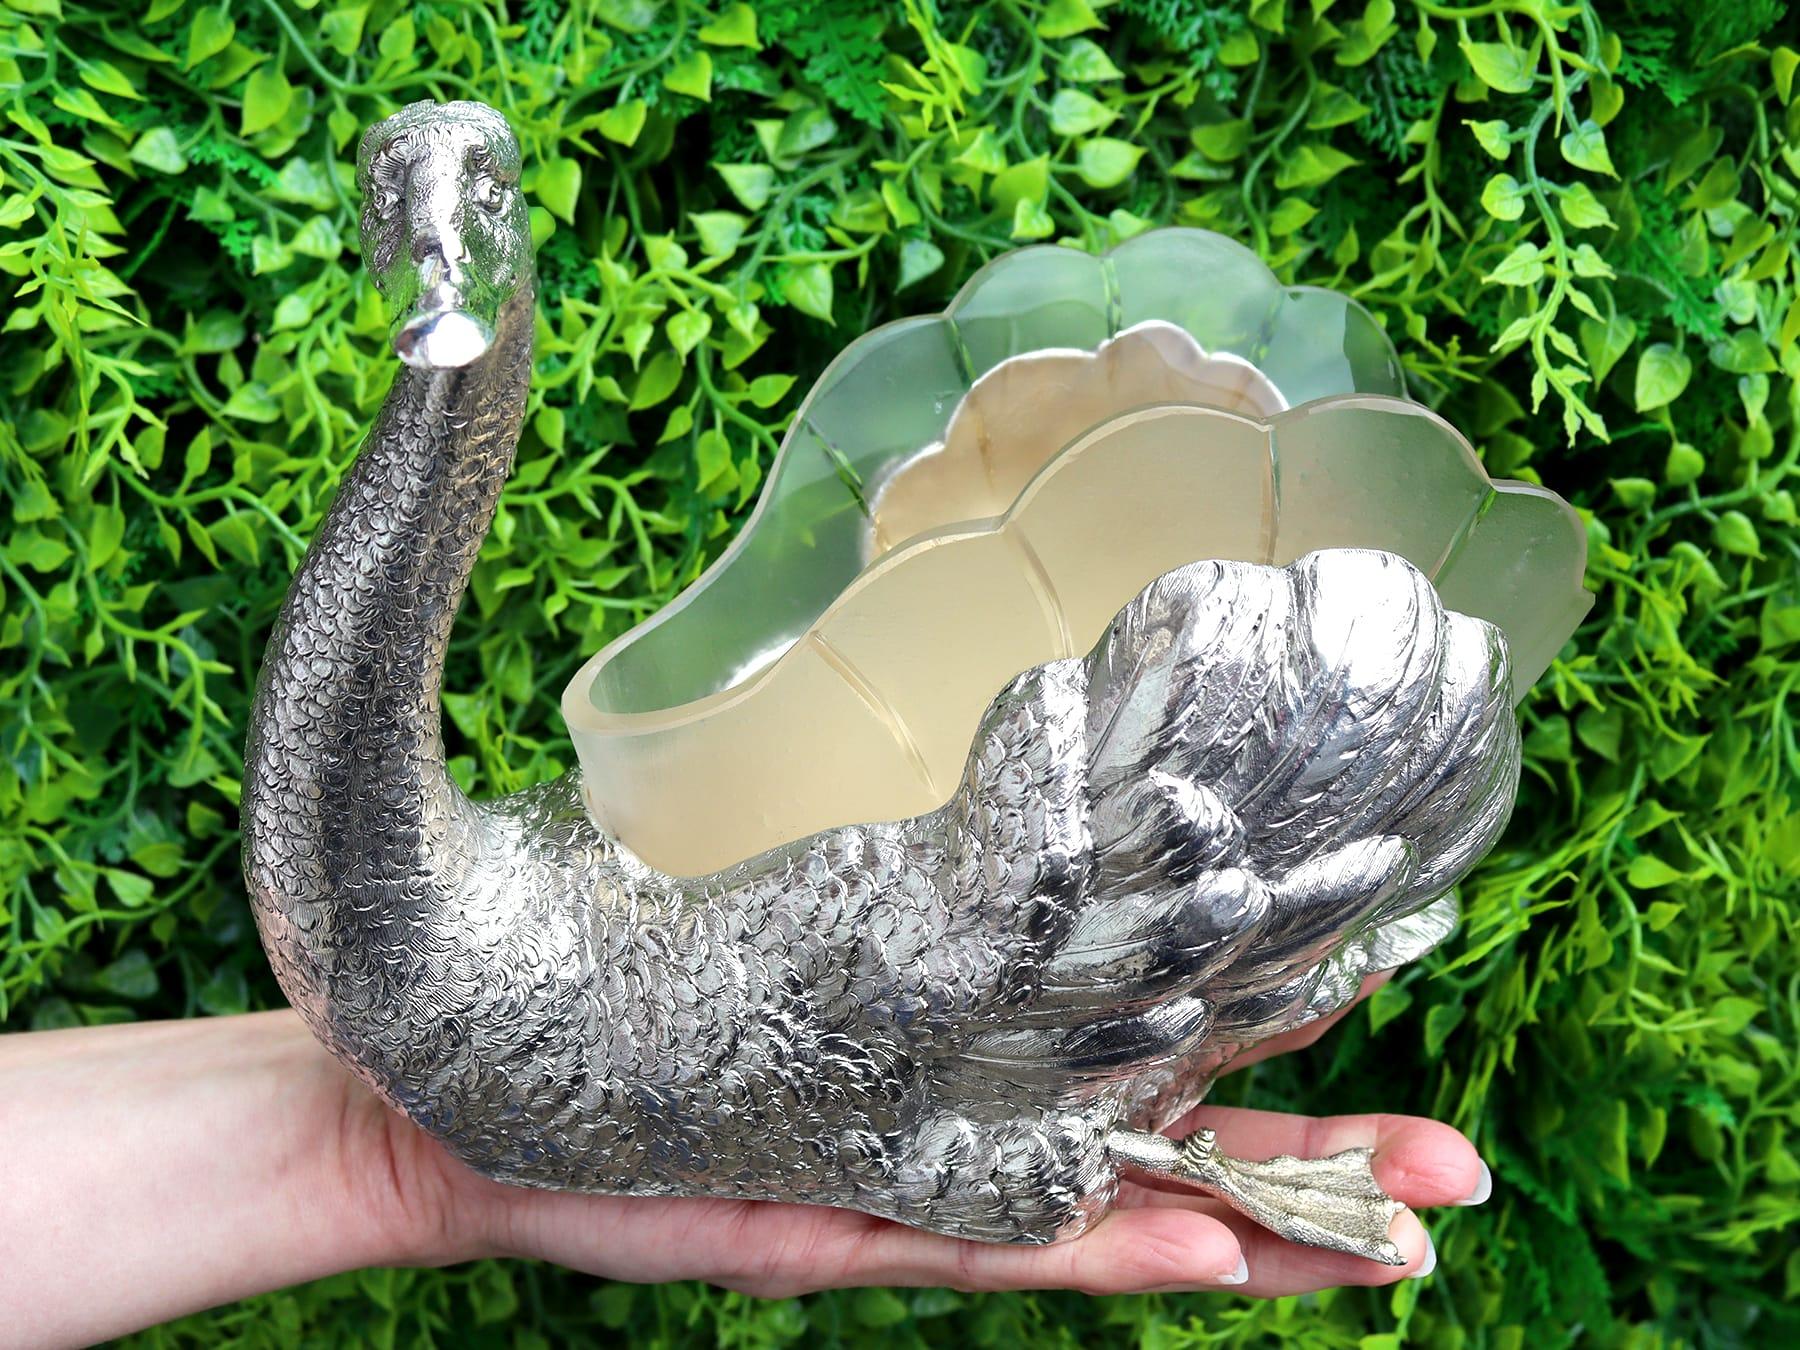 An exceptional, fine and impressive, antique German silver and glass dish / centrepiece modelled in the form of a swan; part of our continental silverware collection.

This exceptional antique German 800 standard silver centrepiece / dish has been